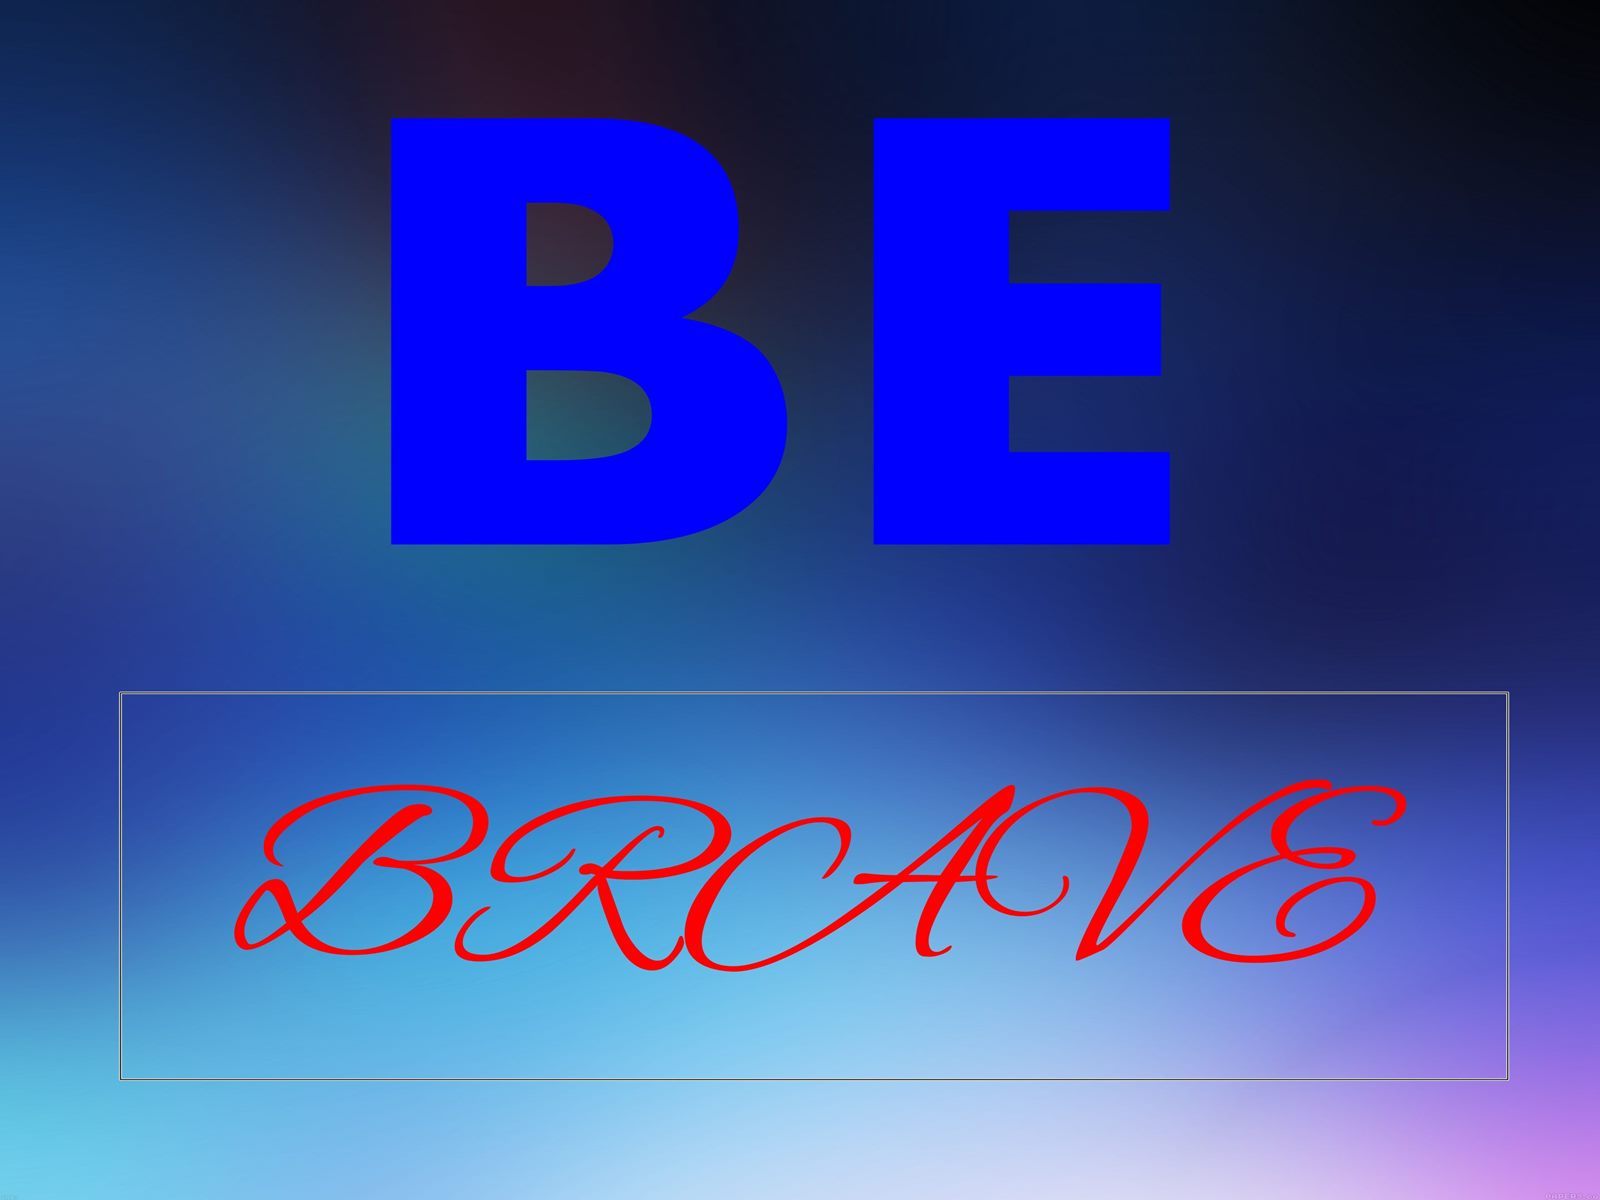 Be Brave Motivation Quotes Hd Wallpaper - Calligraphy - HD Wallpaper 